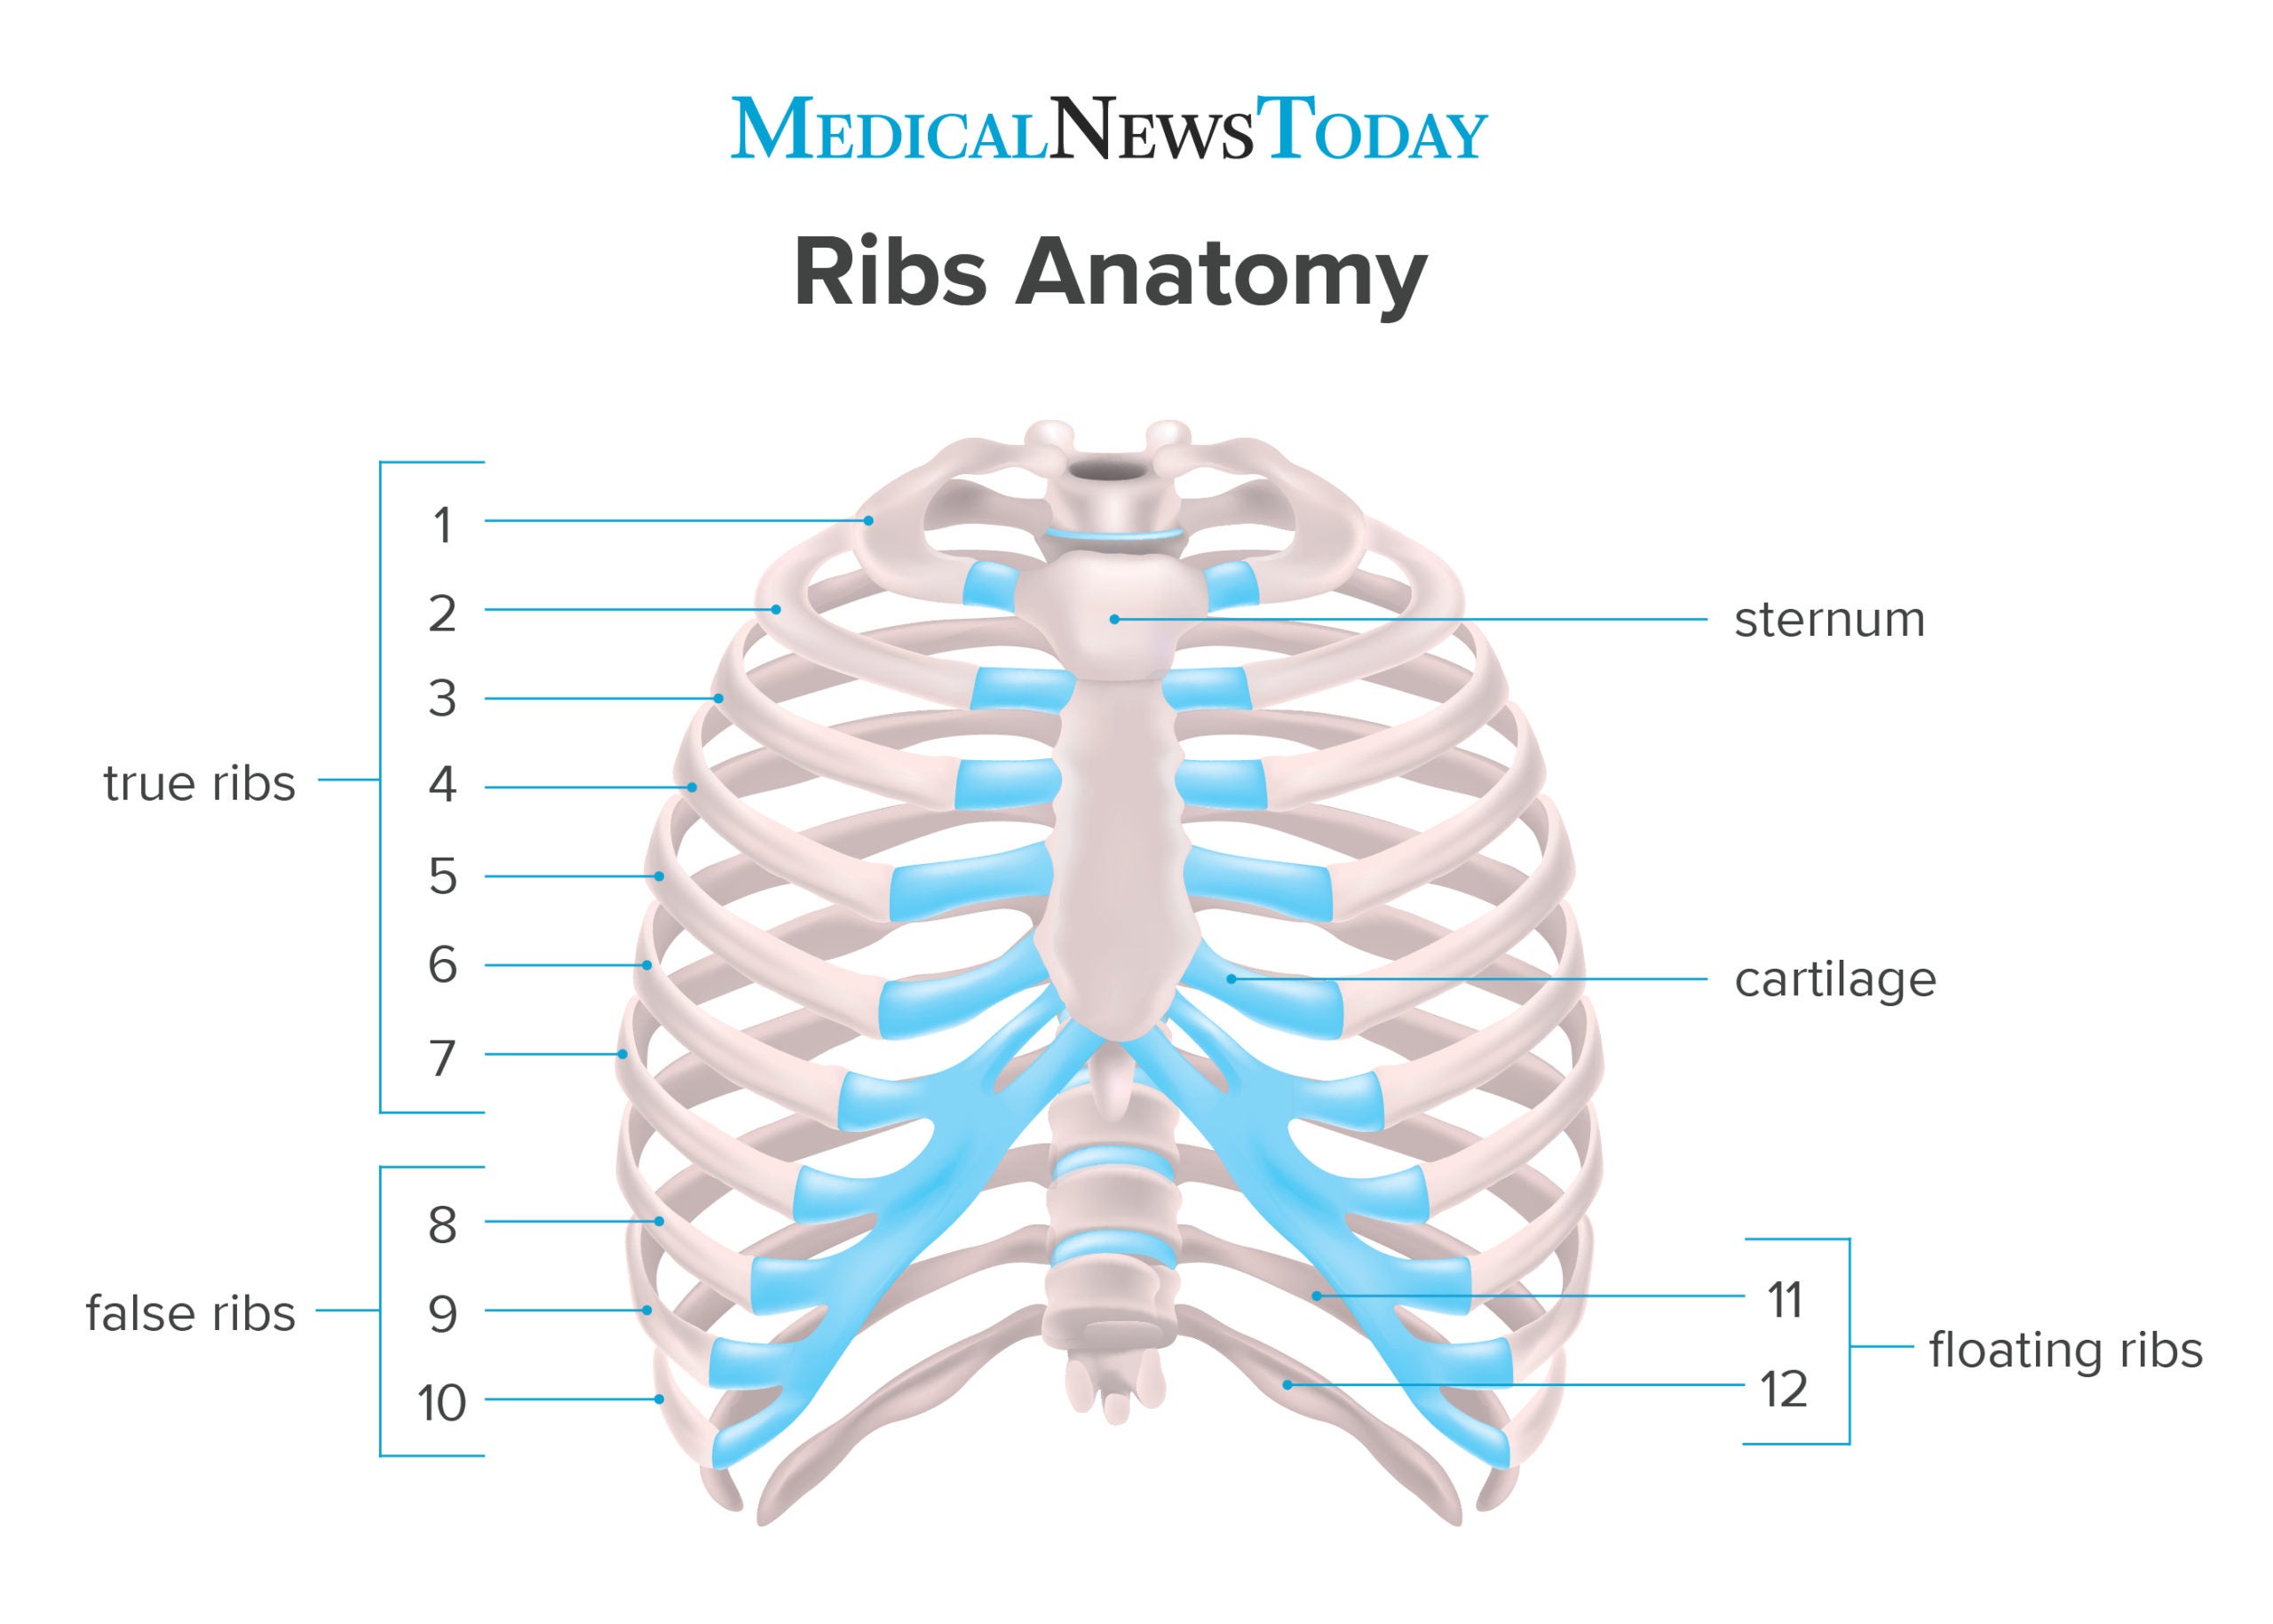 How many ribs do humans have? Men, women, and anatomy